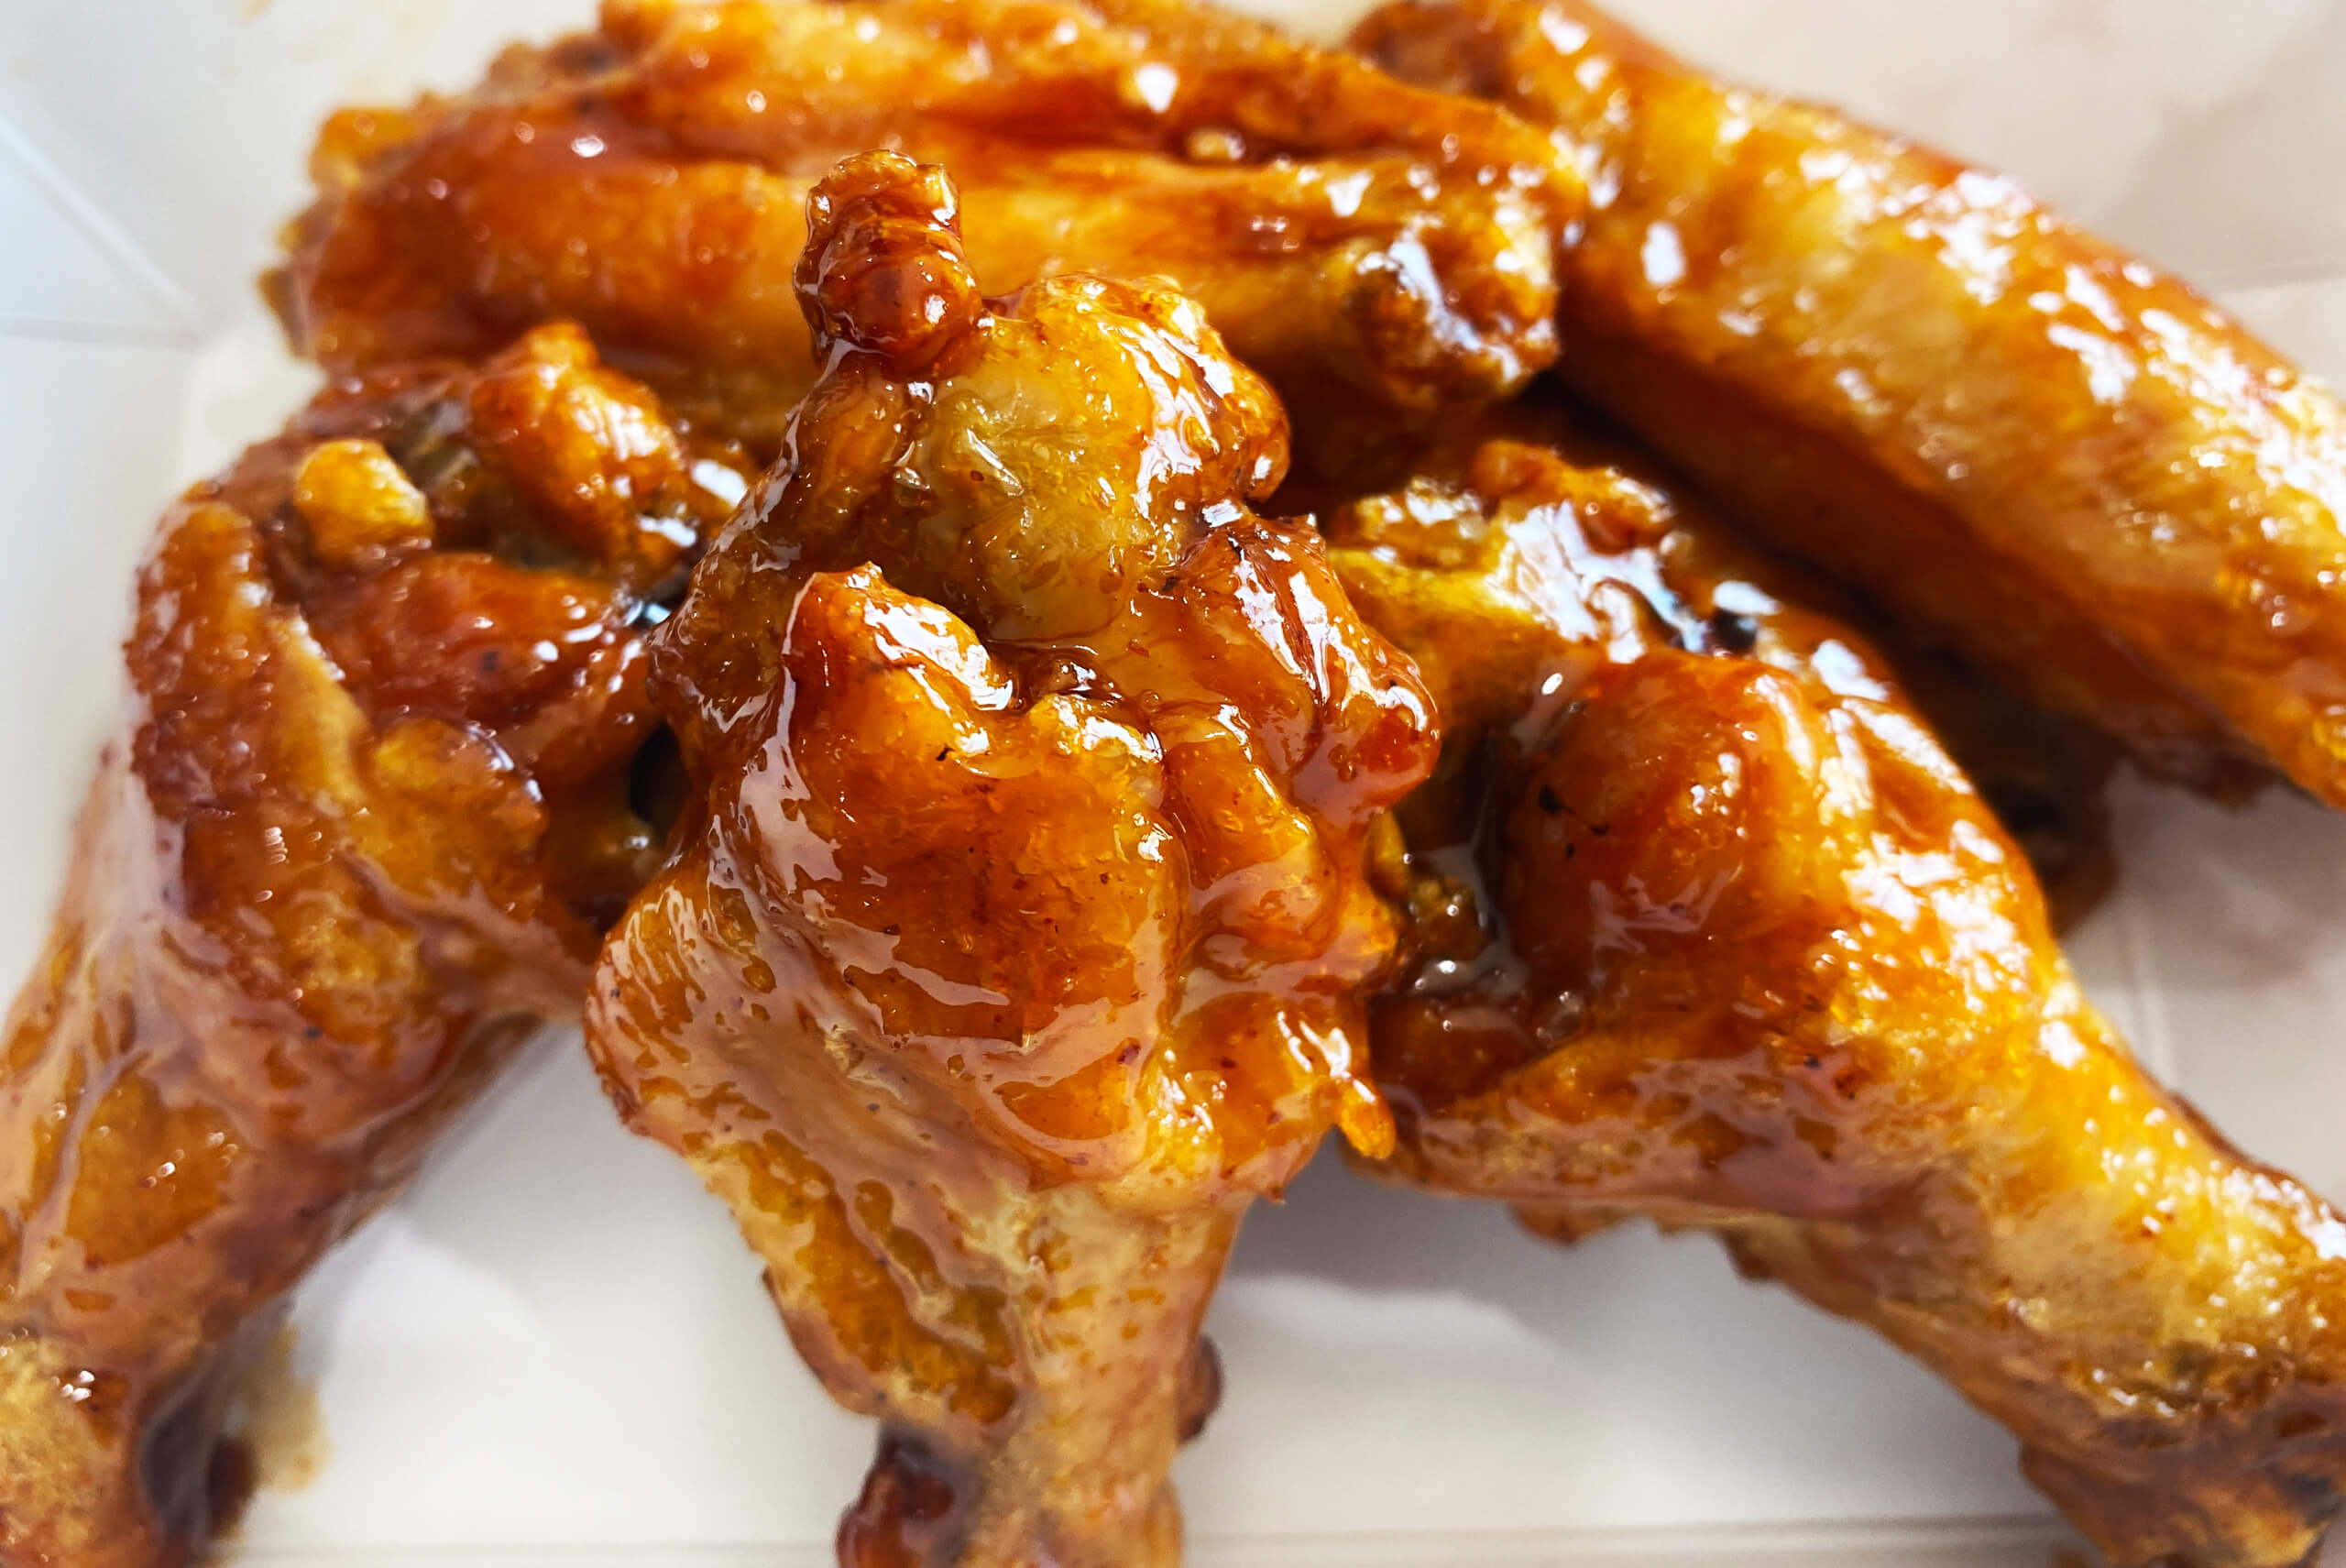 Sauced Chicken Wings. Chicken wing dings!? Delicious.